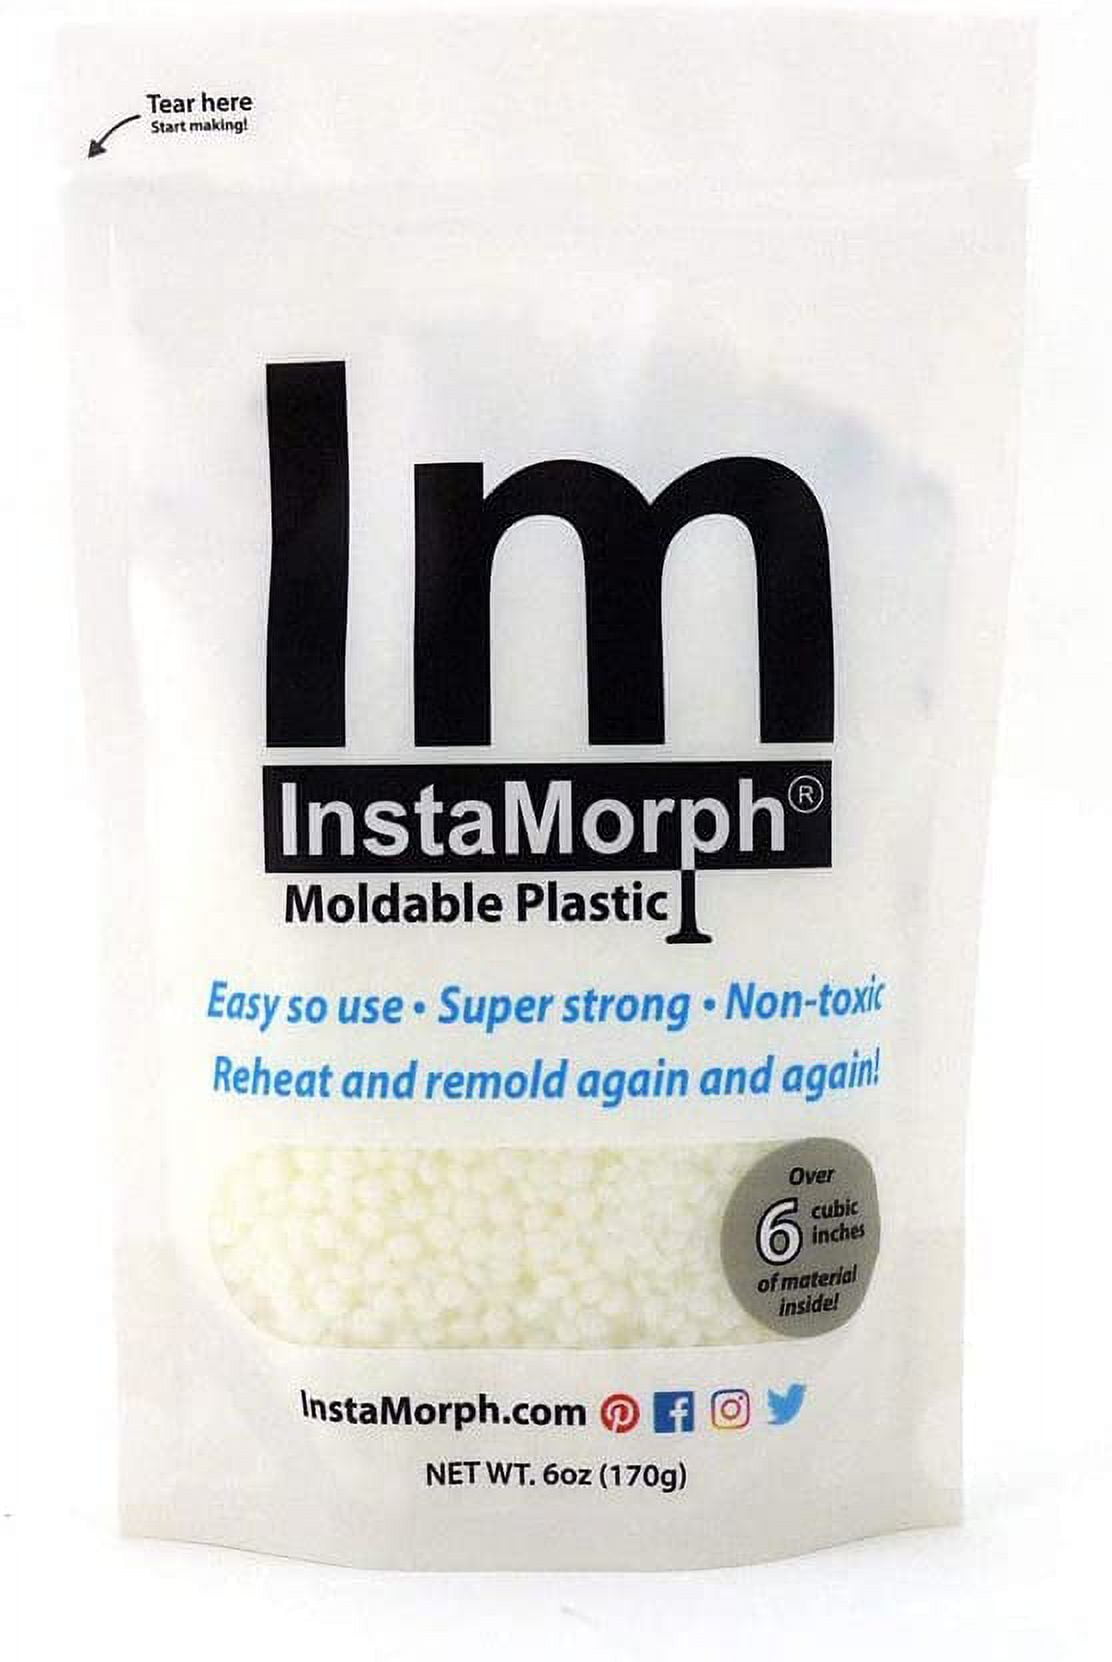 InstaMorph Moldable Plastic Reusable Thermoplastic Beads Modeling